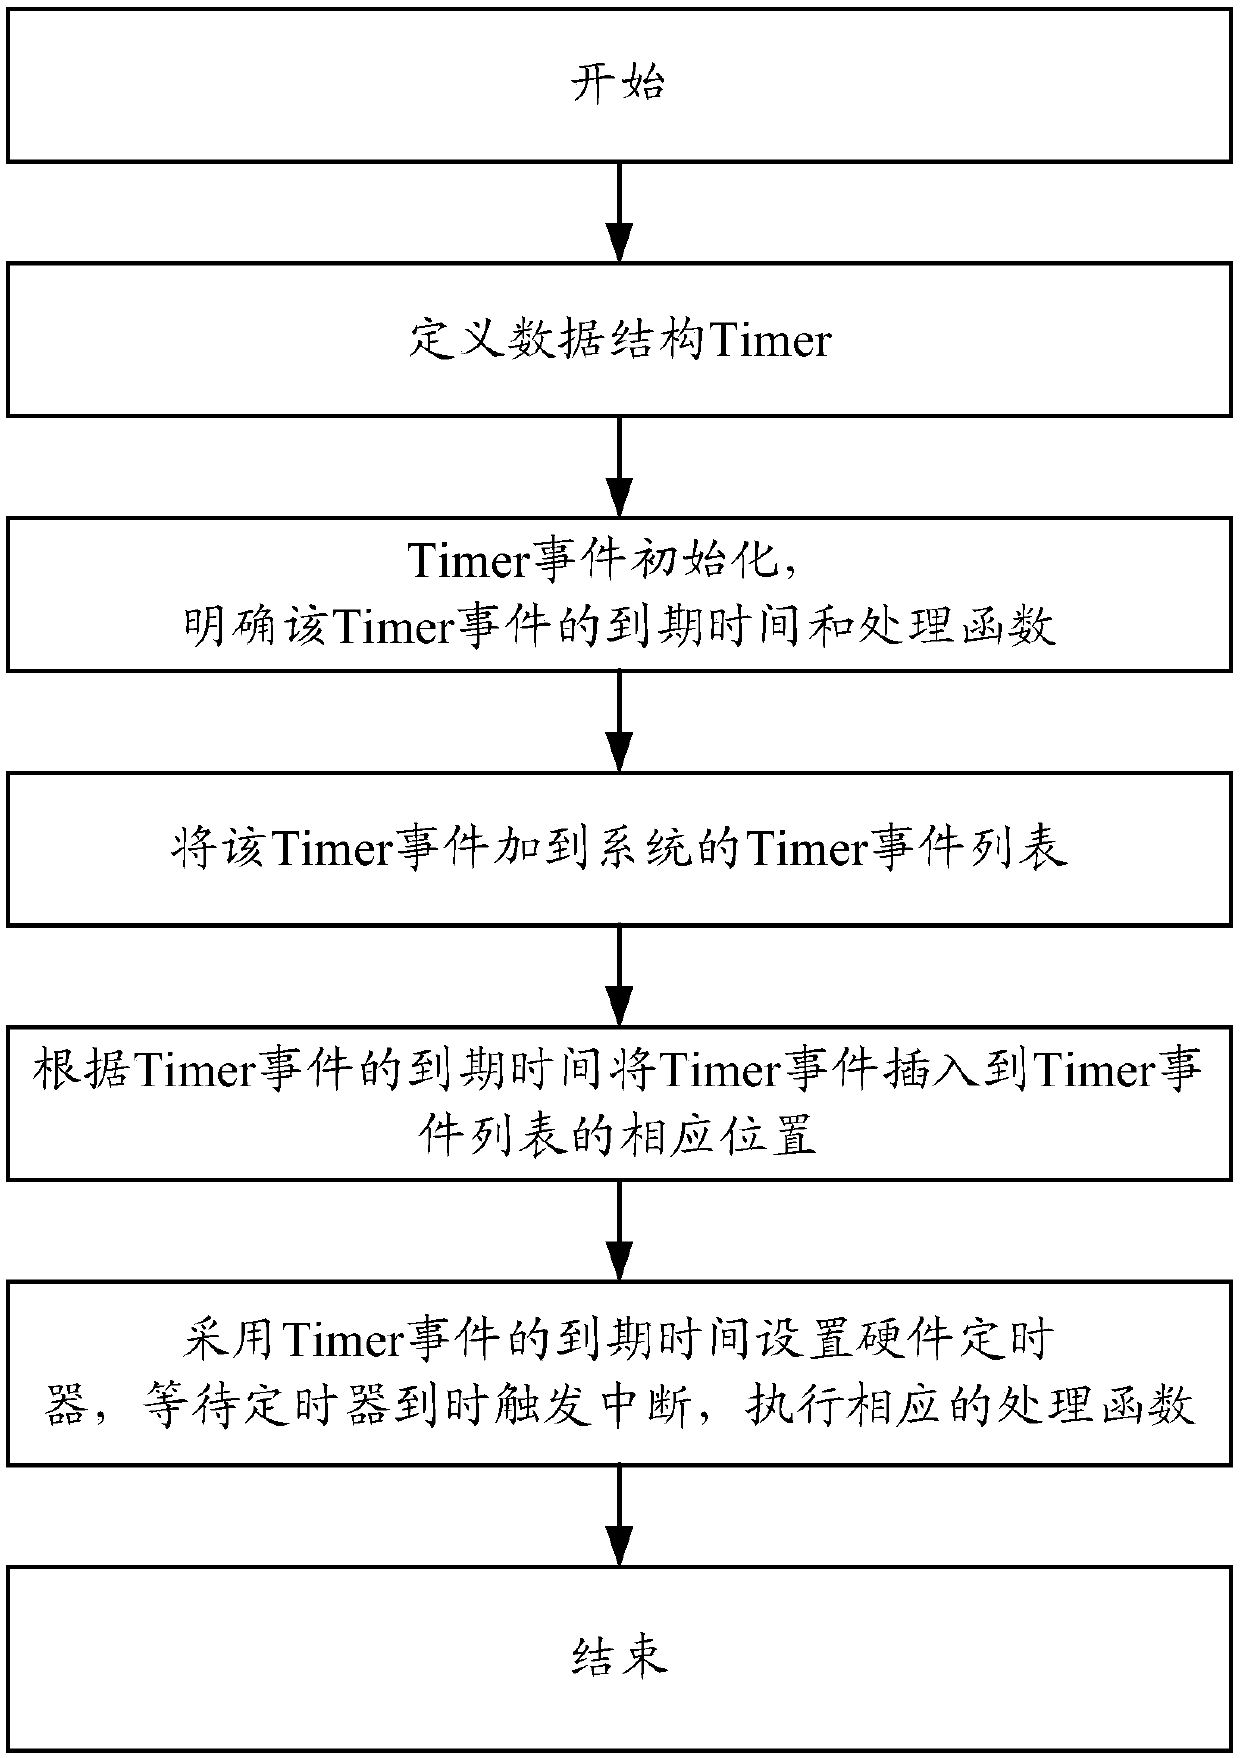 A method and device for processing timer events